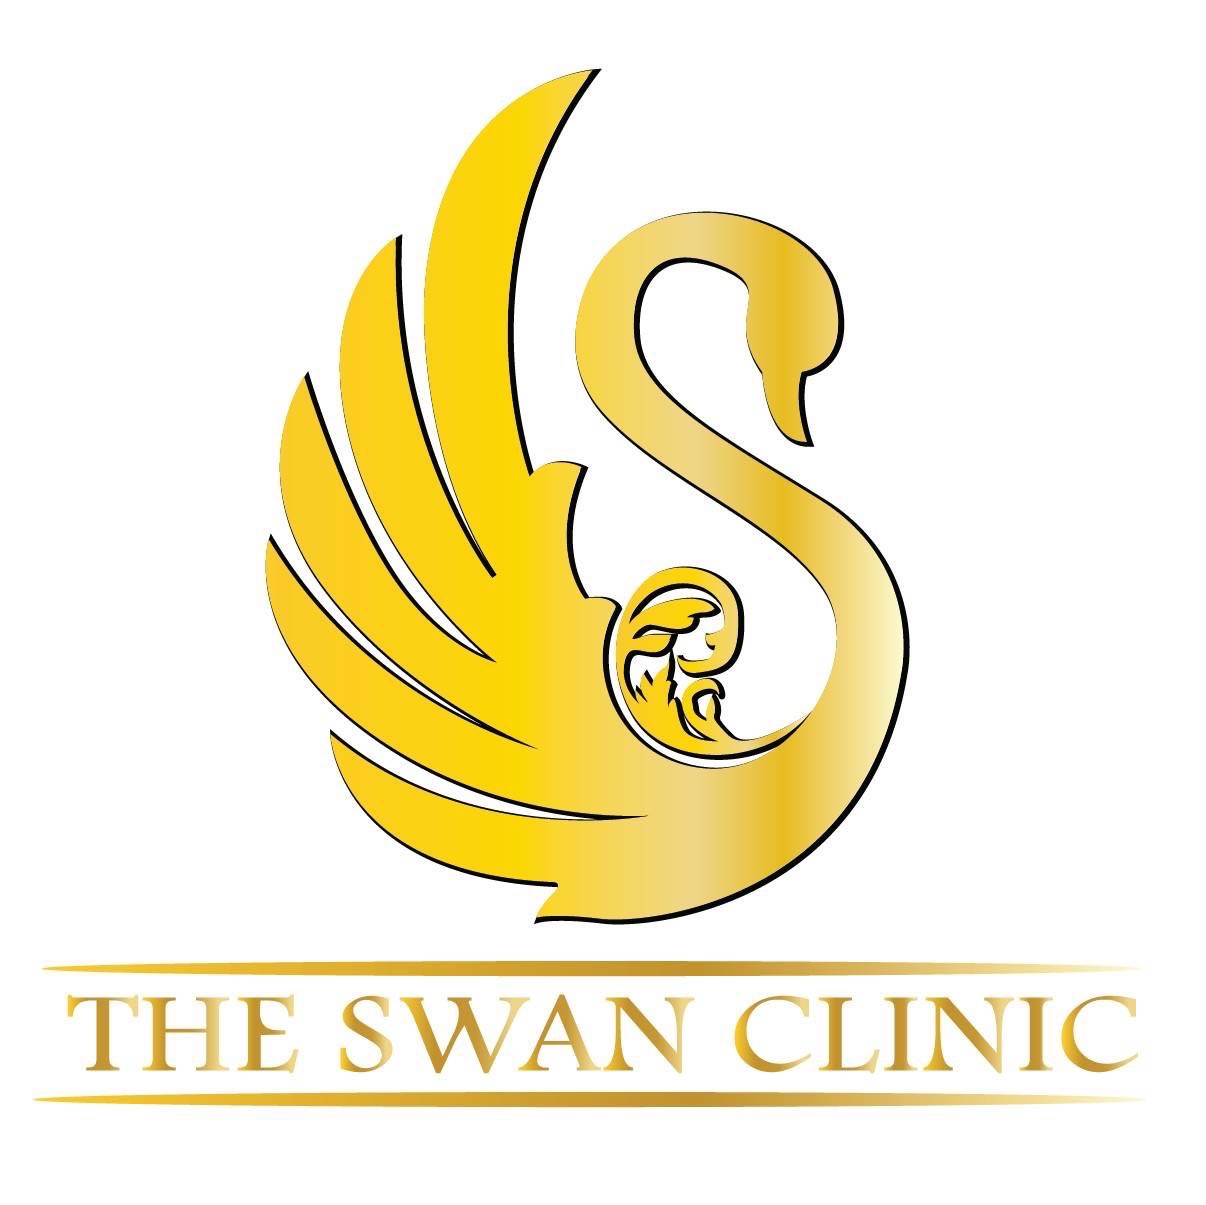 The Swan Clinic